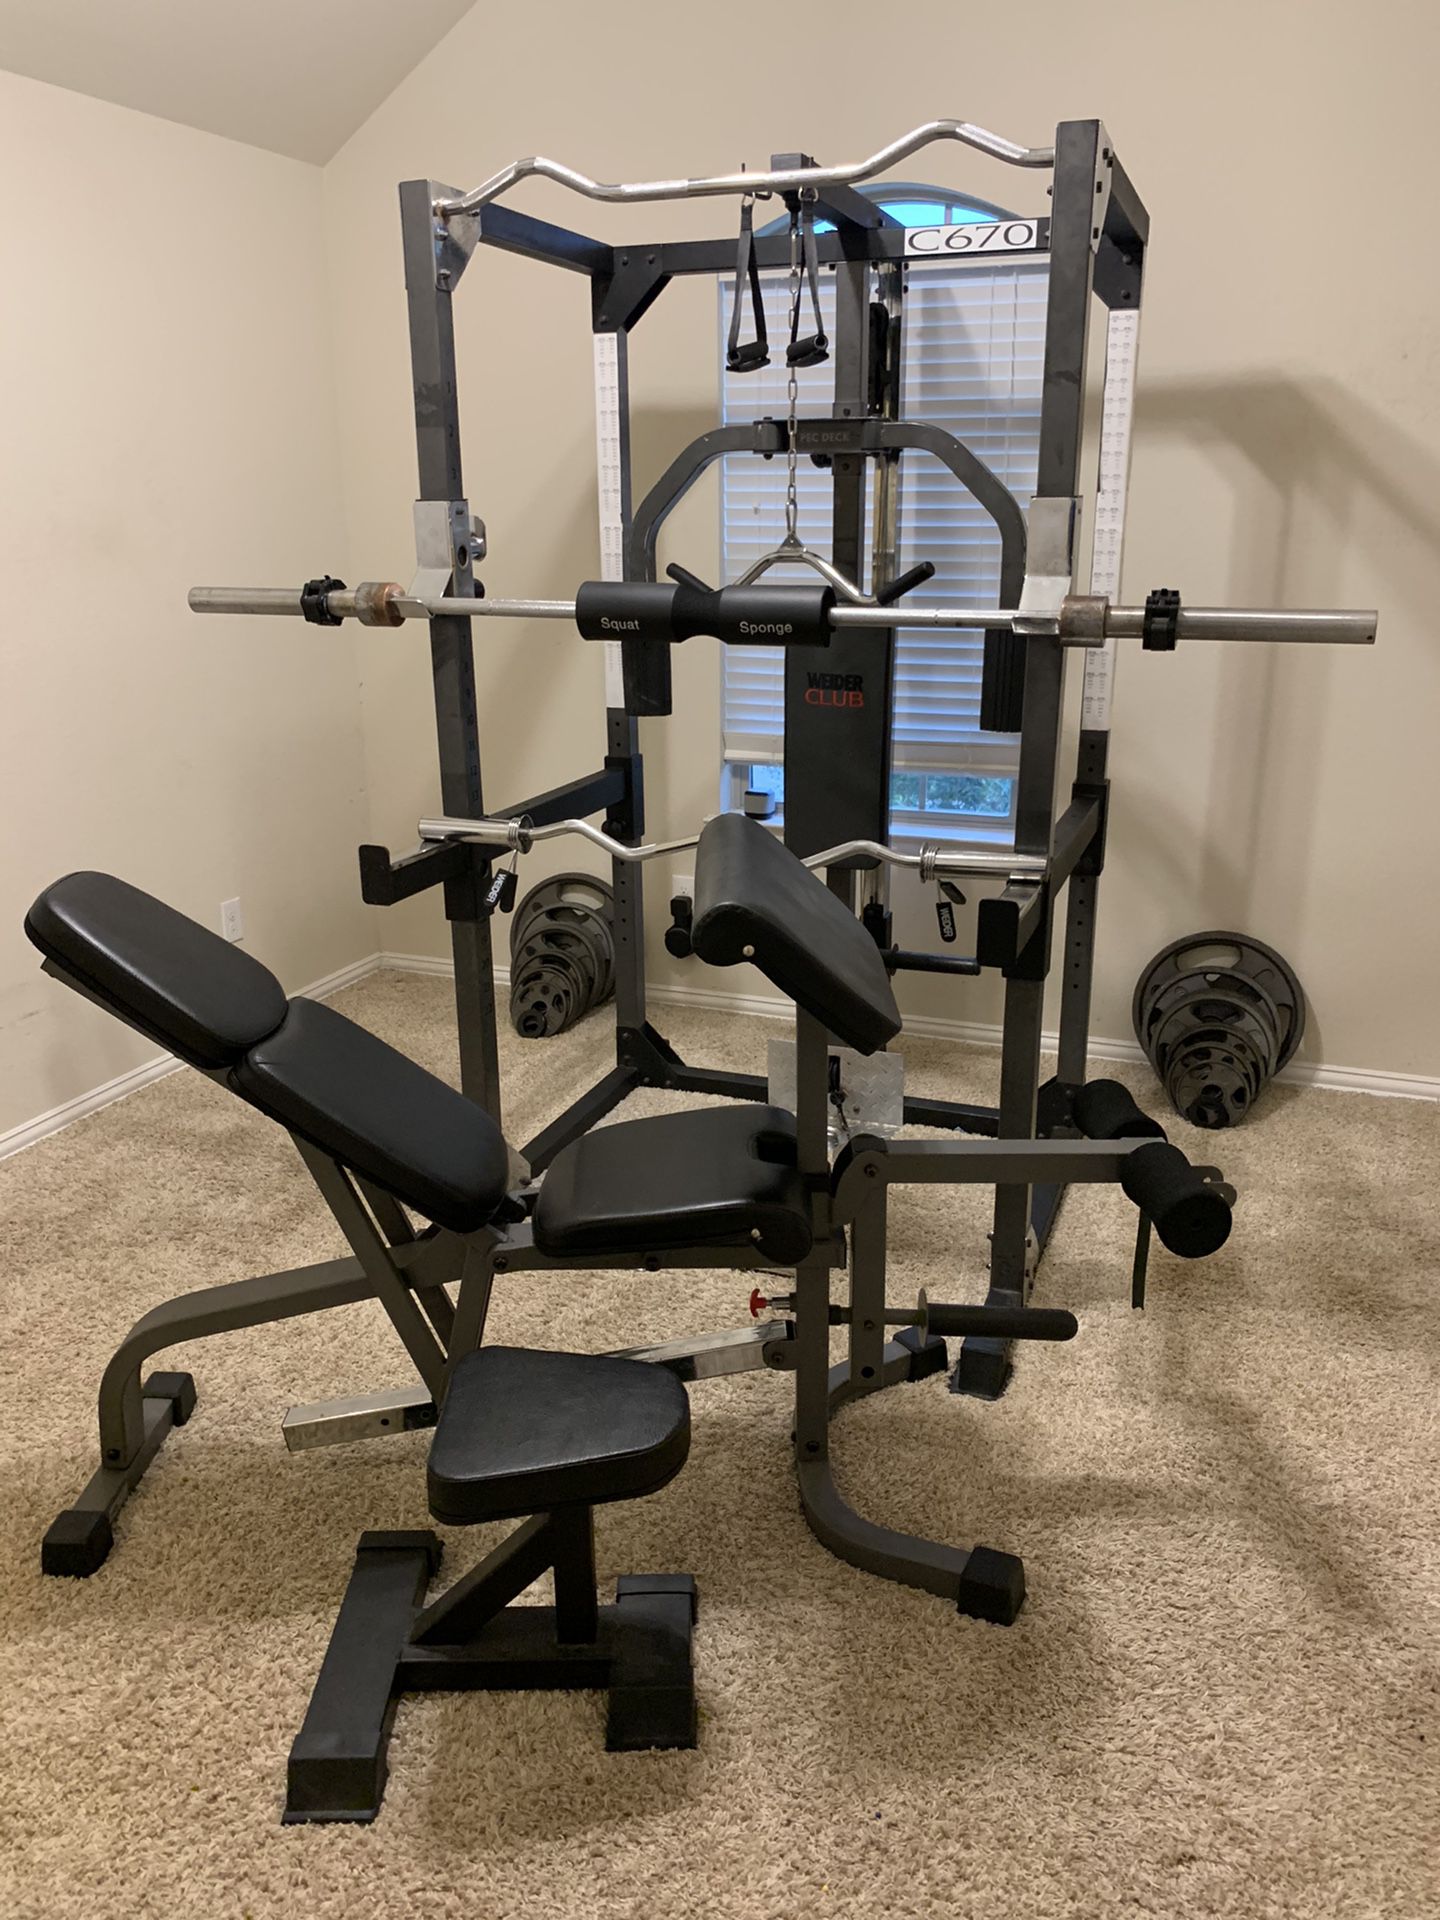 Weider Club C670 Home Gym / Weight Cage / 327.5 lbs Olympic Weights